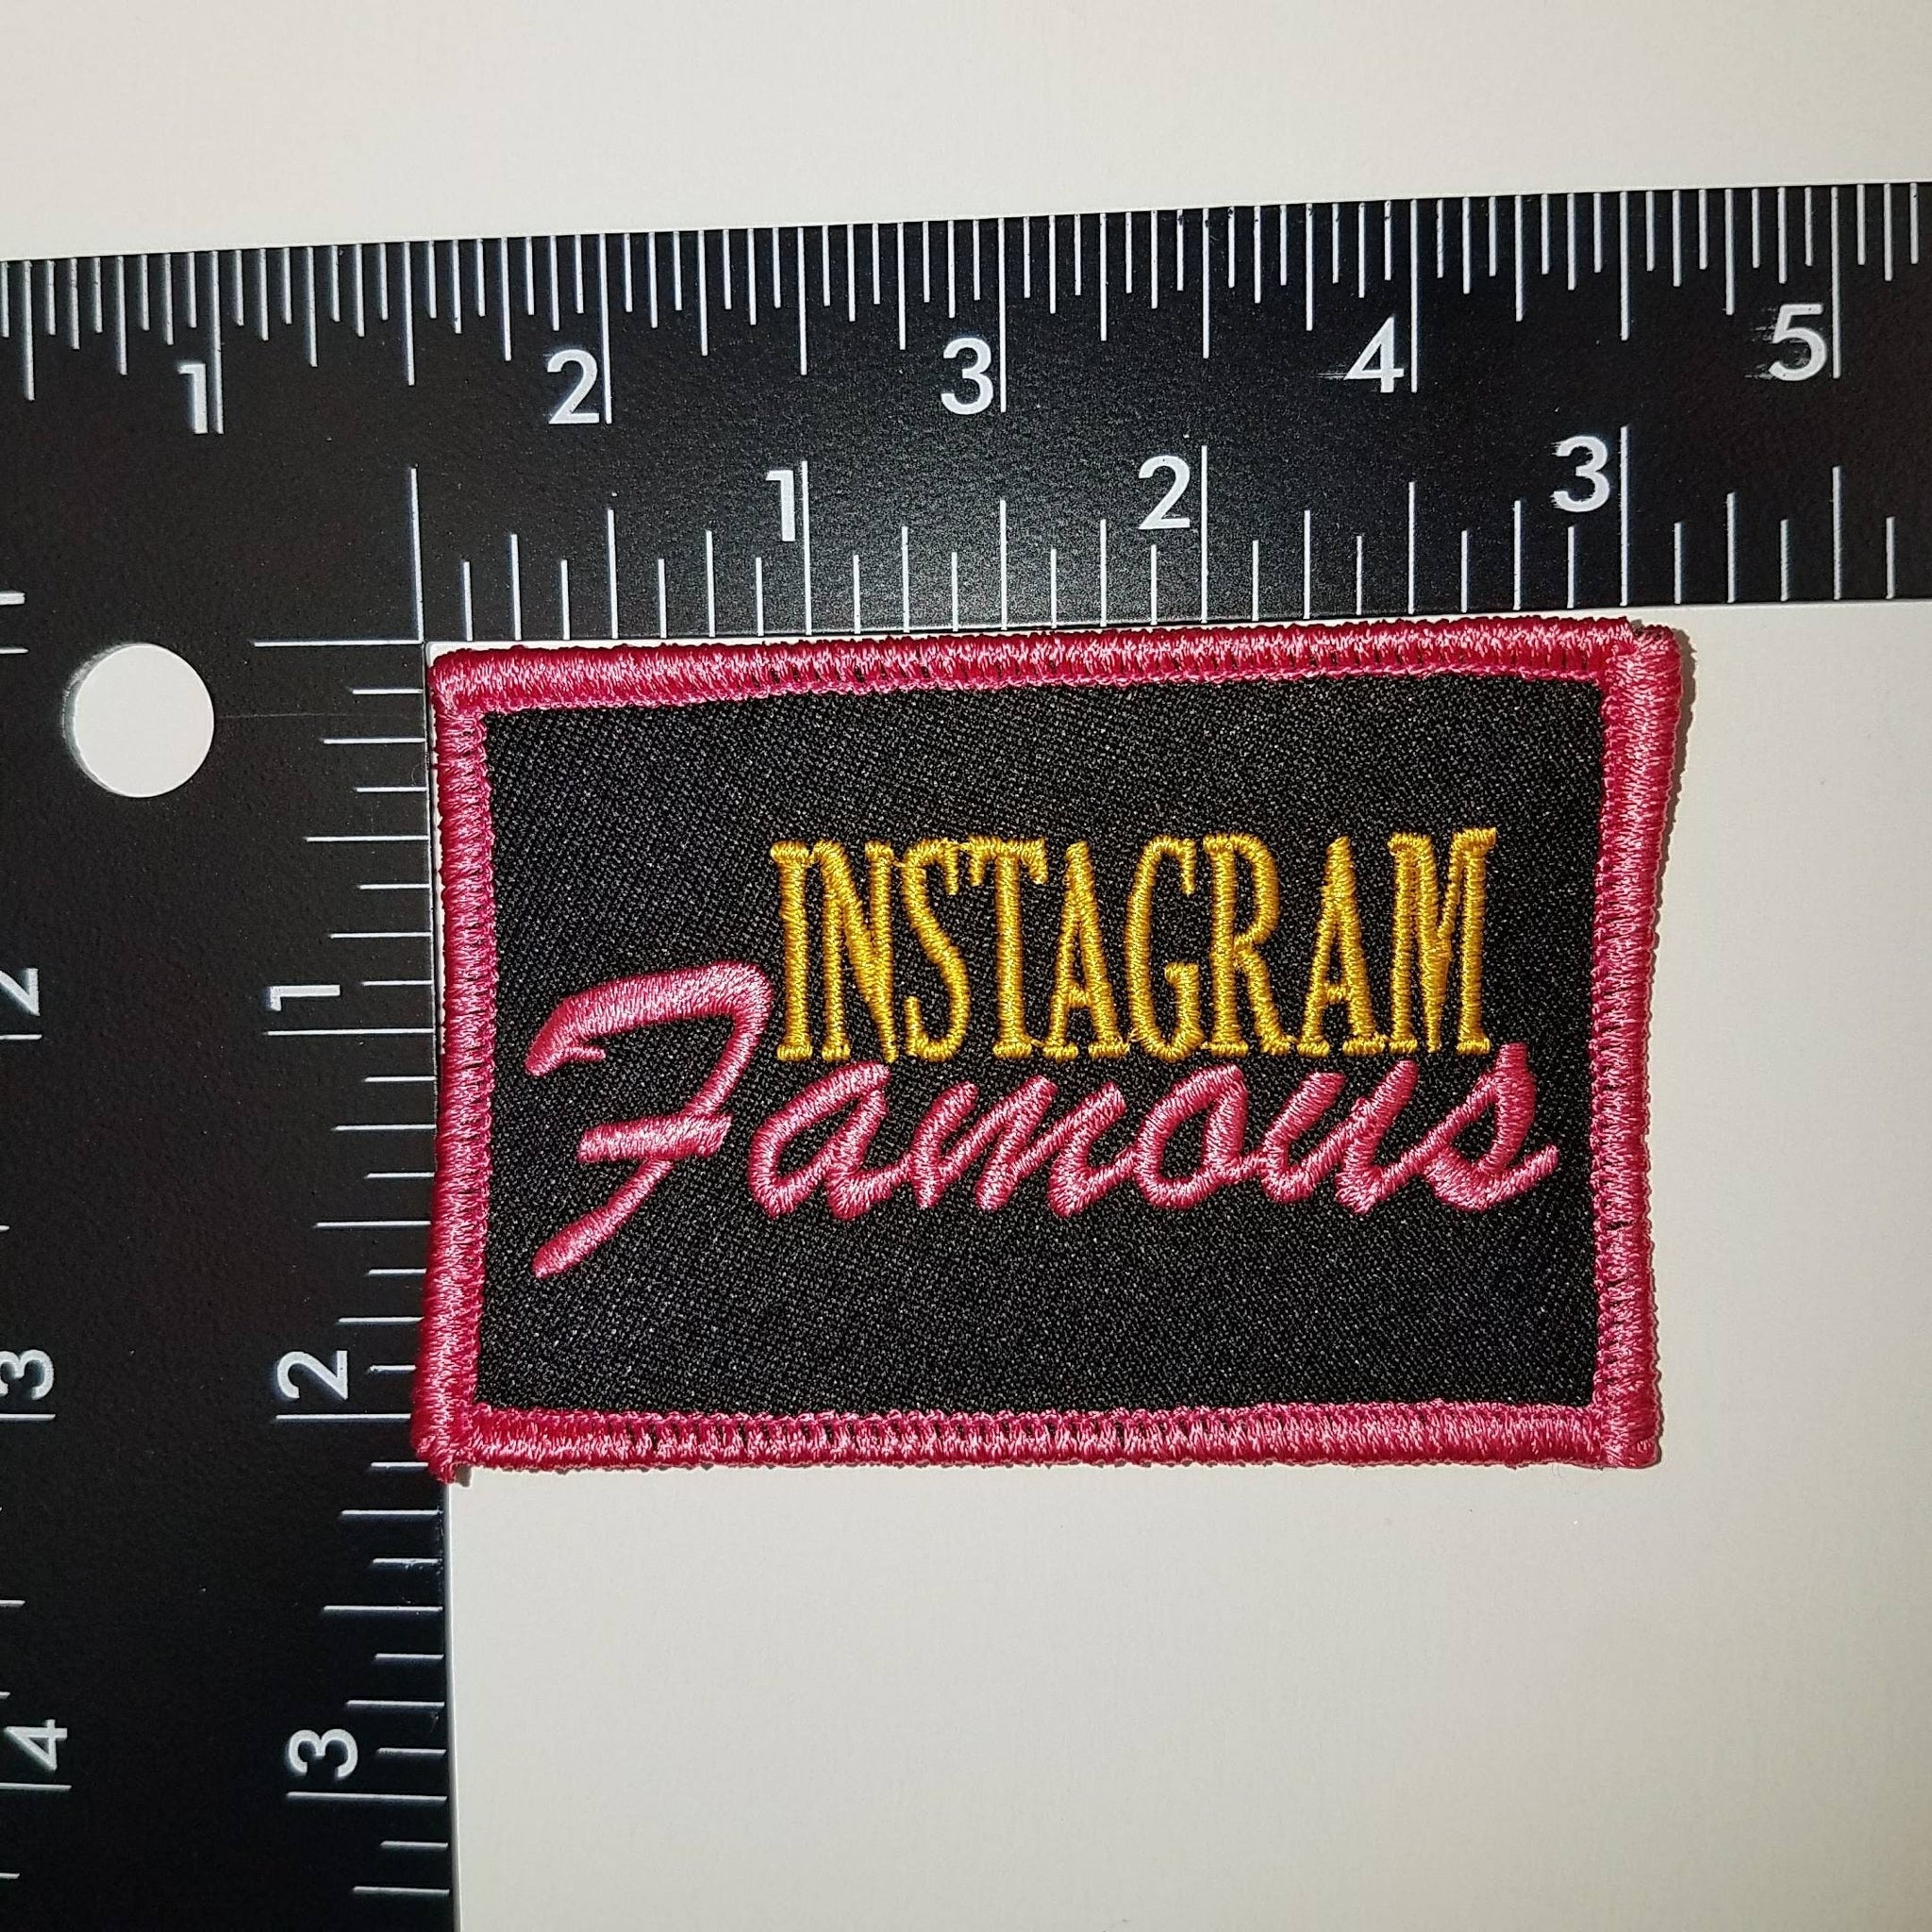 Exclusive 3x2-inch, Cool "Instagram Famous" Iron-on Embroidered Patch; Influencer Patch; IG